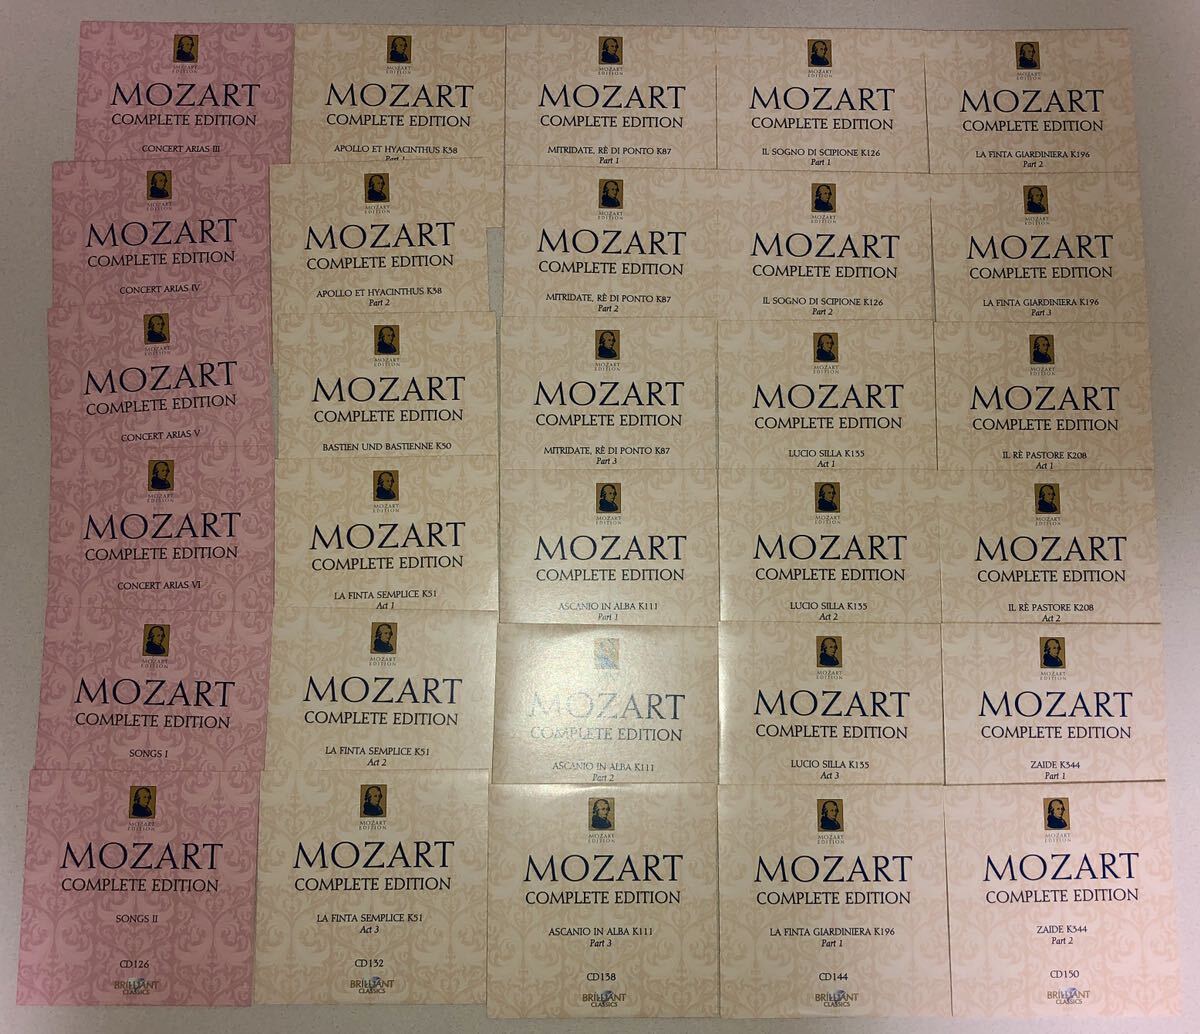 MOZART COMPLETE EDITION Complete Works on CD (170 CD + CD-ROM)ブリリアント社製 モーツァルト全集の画像9